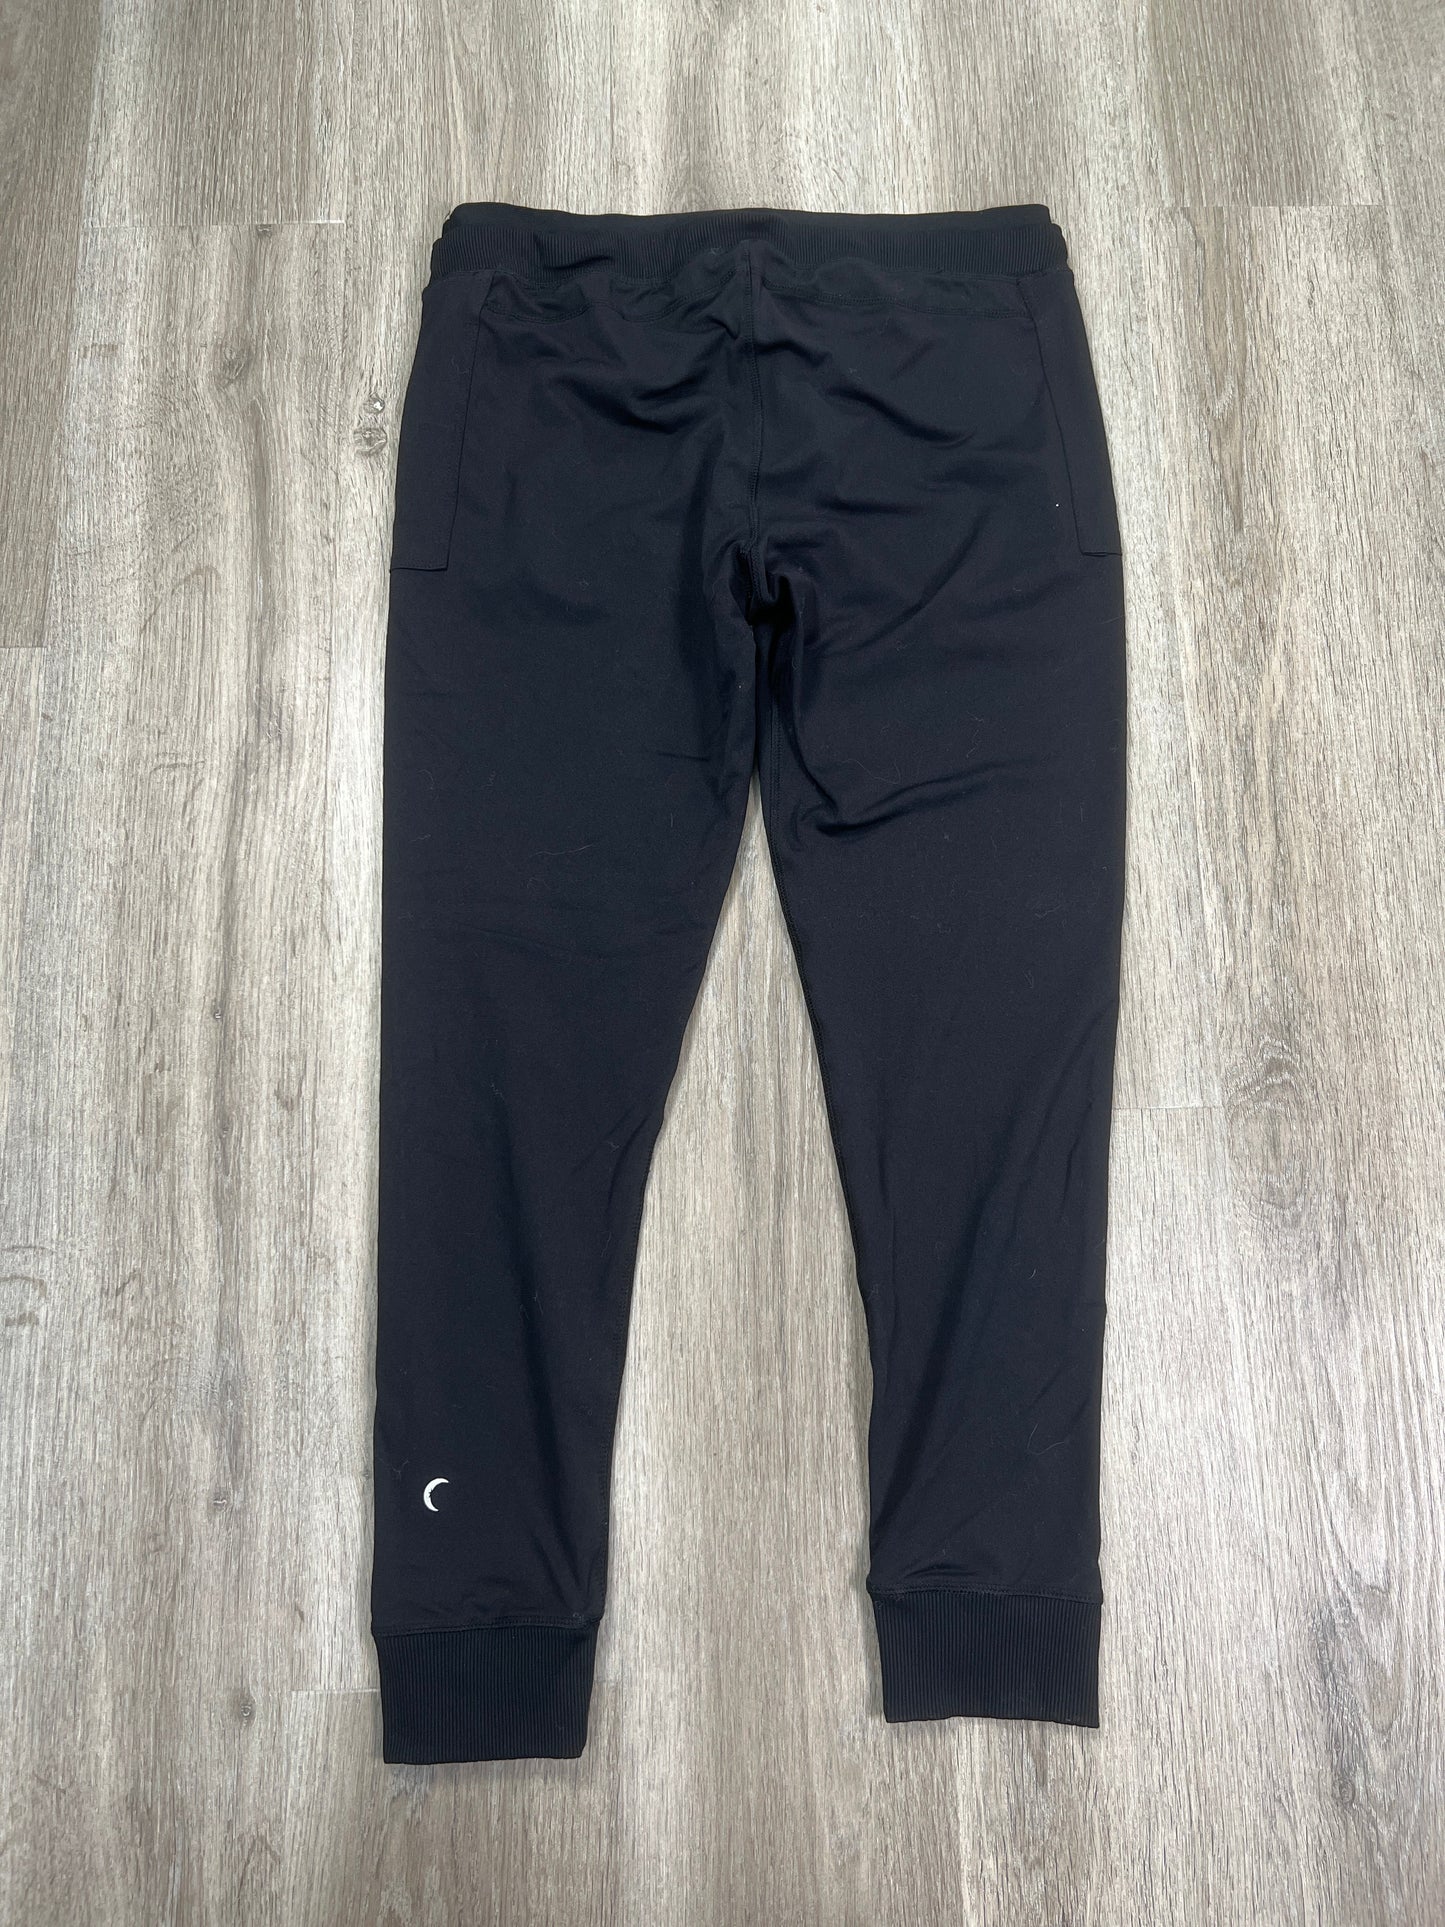 Pants Joggers By Zyia  Size: L